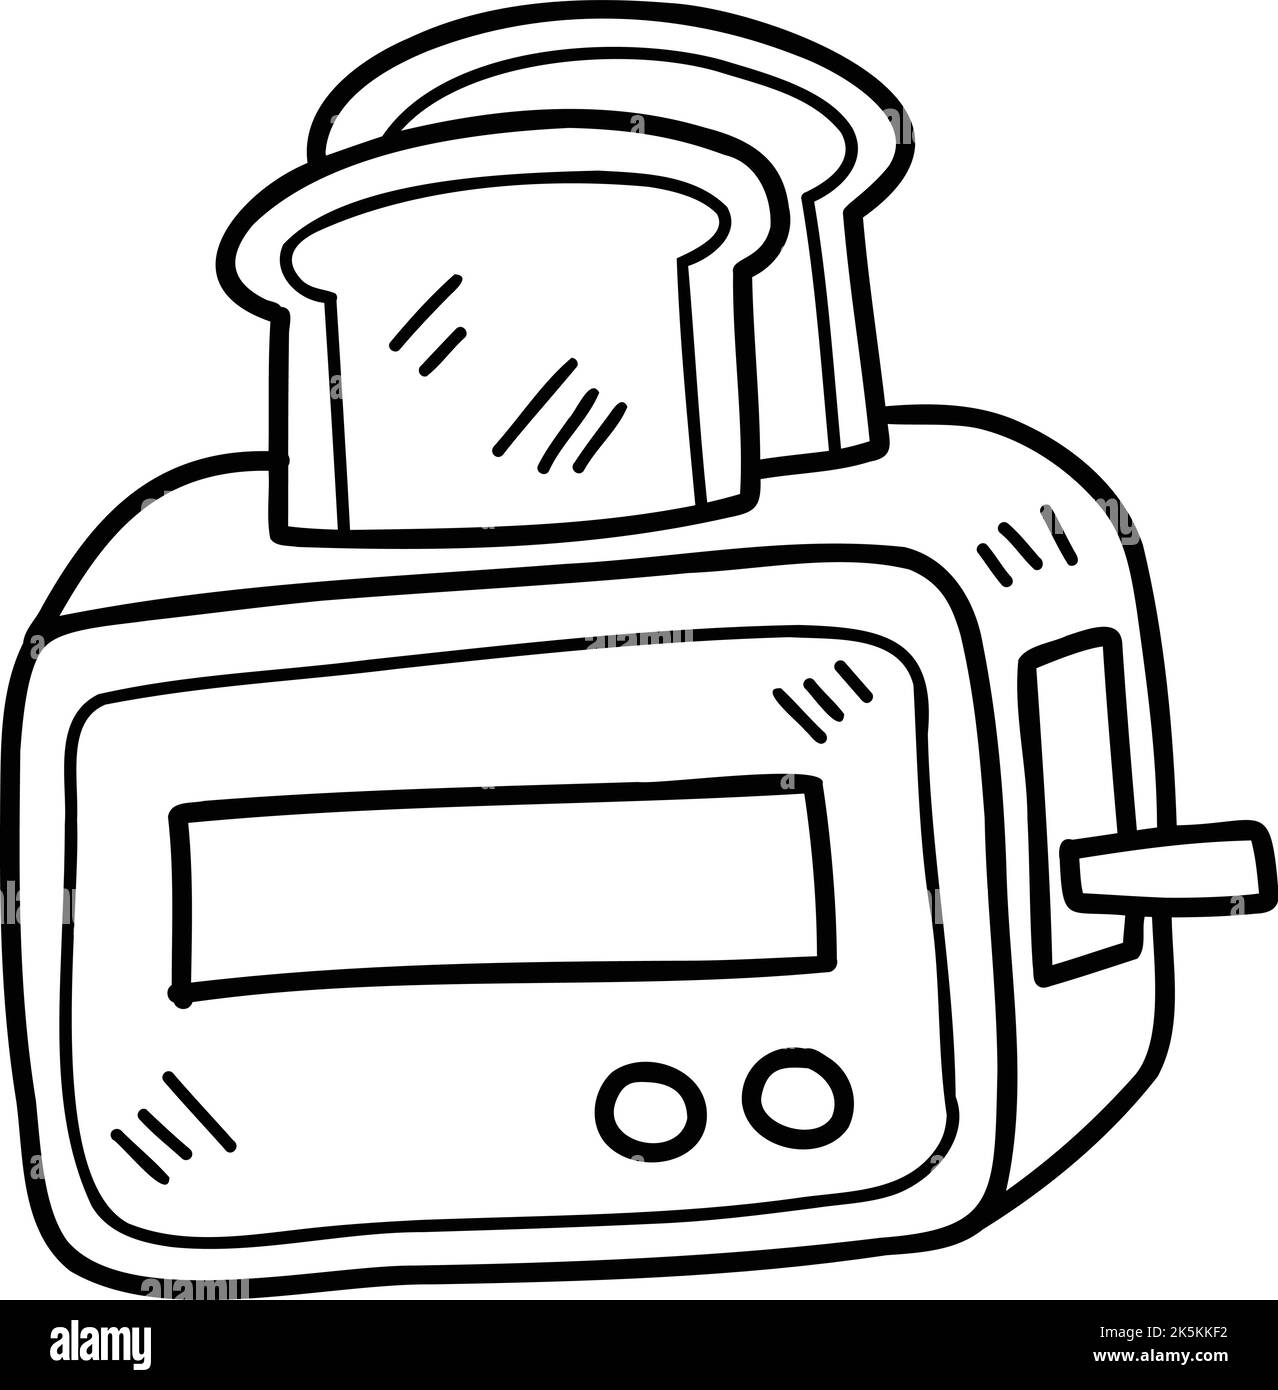 Hand Drawn Toaster and toast illustration isolated on background Stock Vector